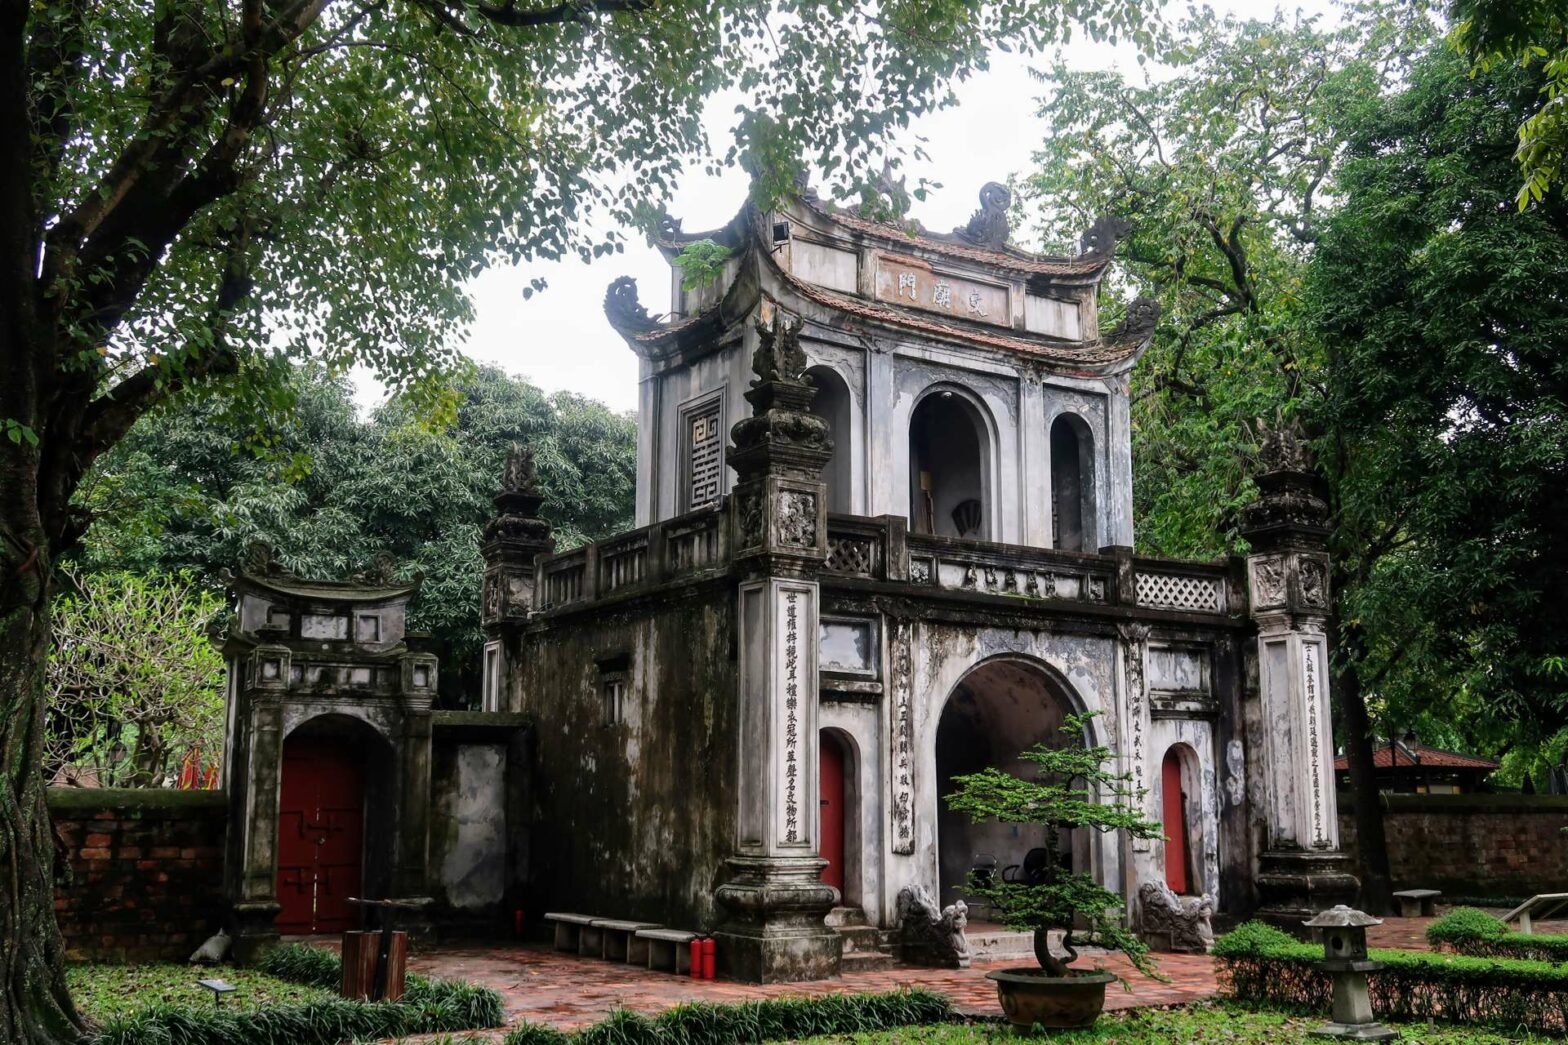 Temple of Literature, a stop on the Hanoi Walking Tour